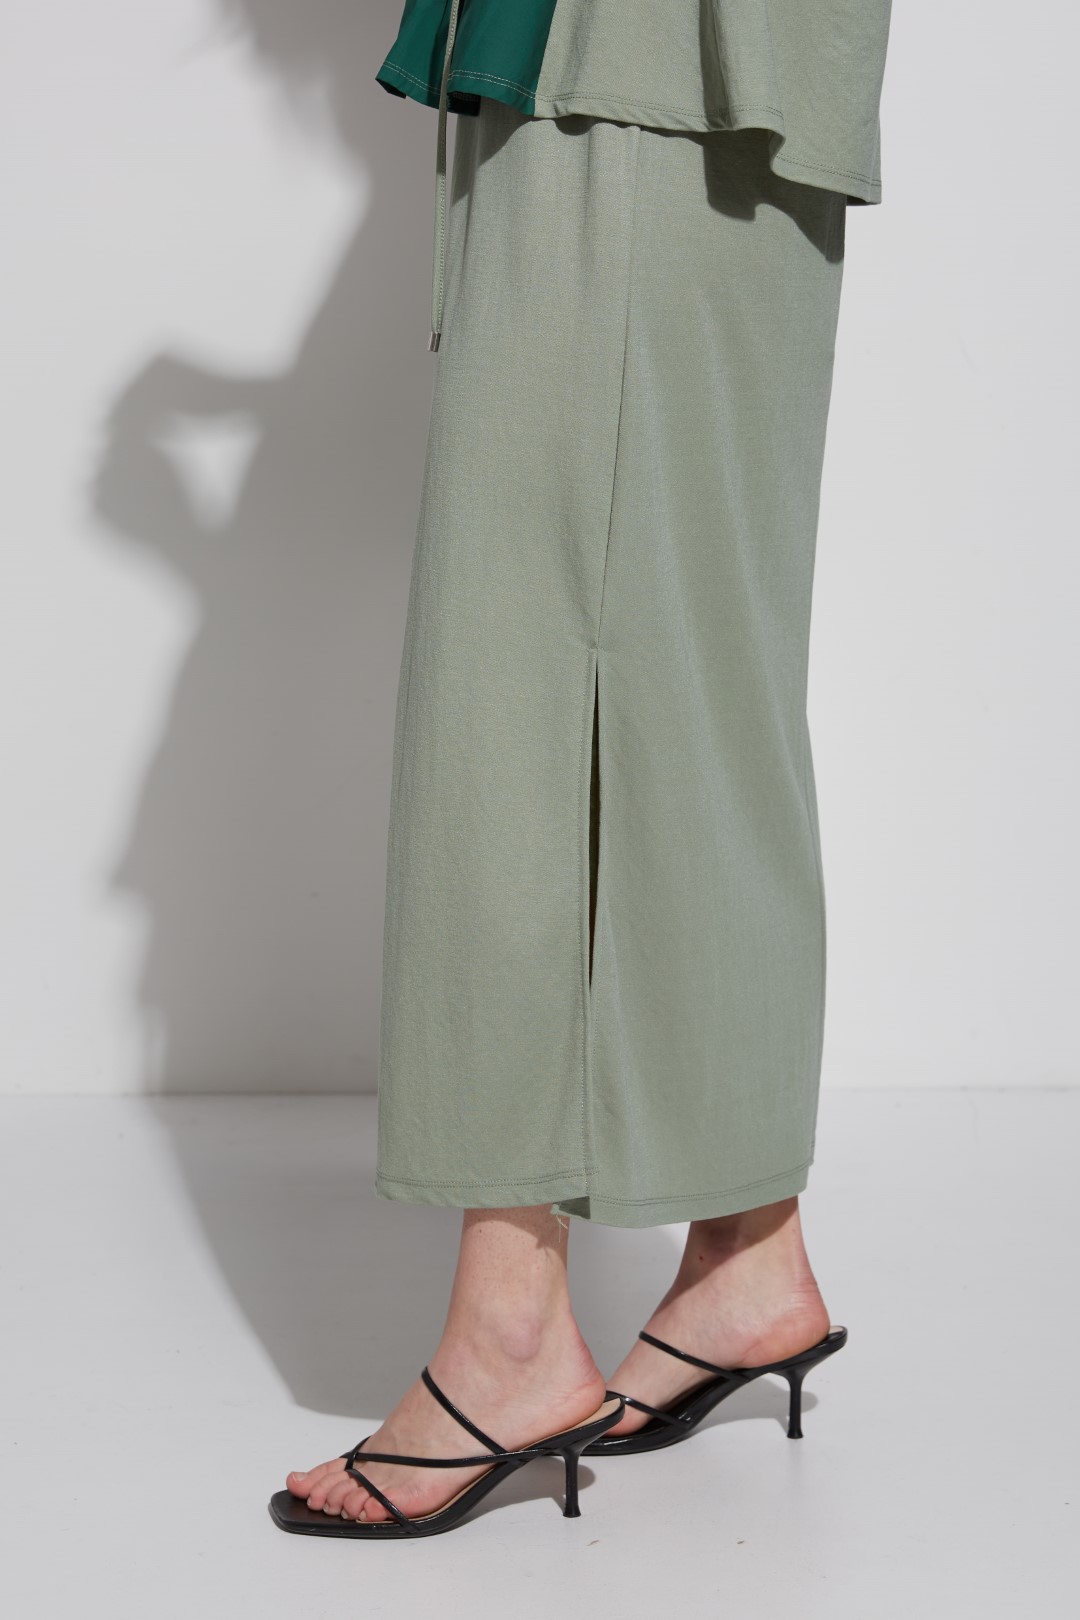 Skirt with lateral slides